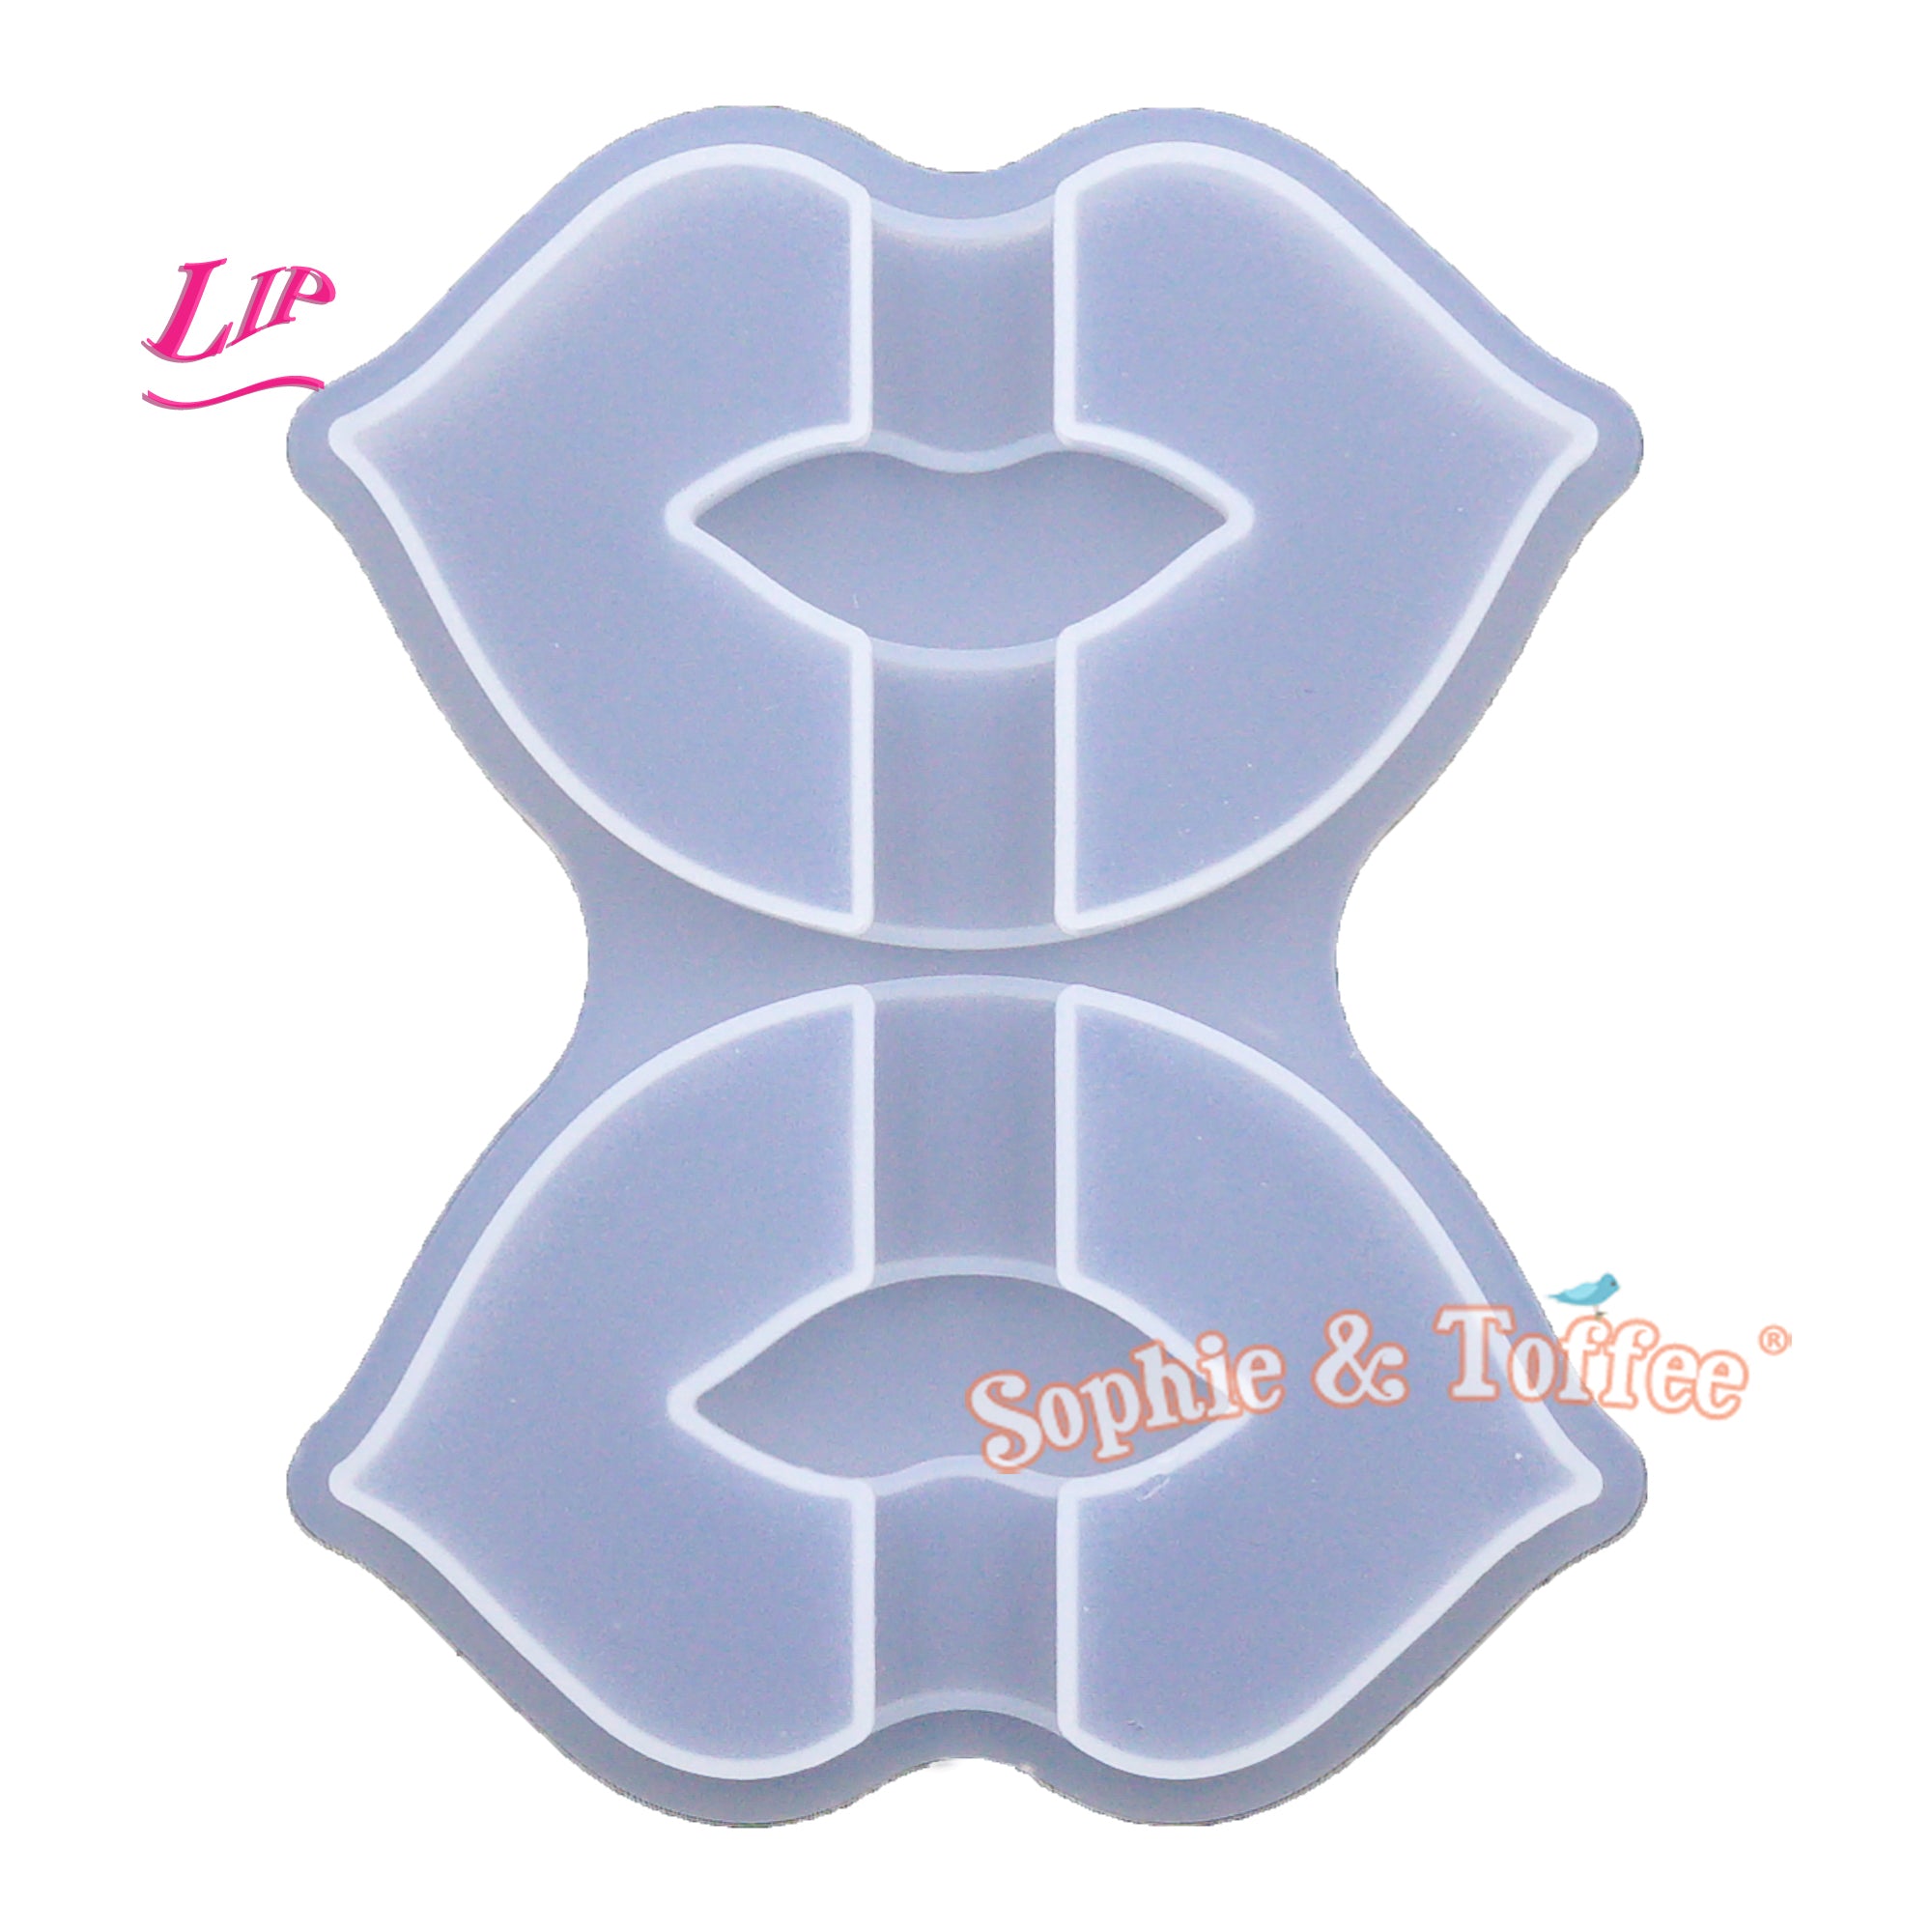 Set of 4 Anchor Silicone Molds for UV and Epoxy Resin Art